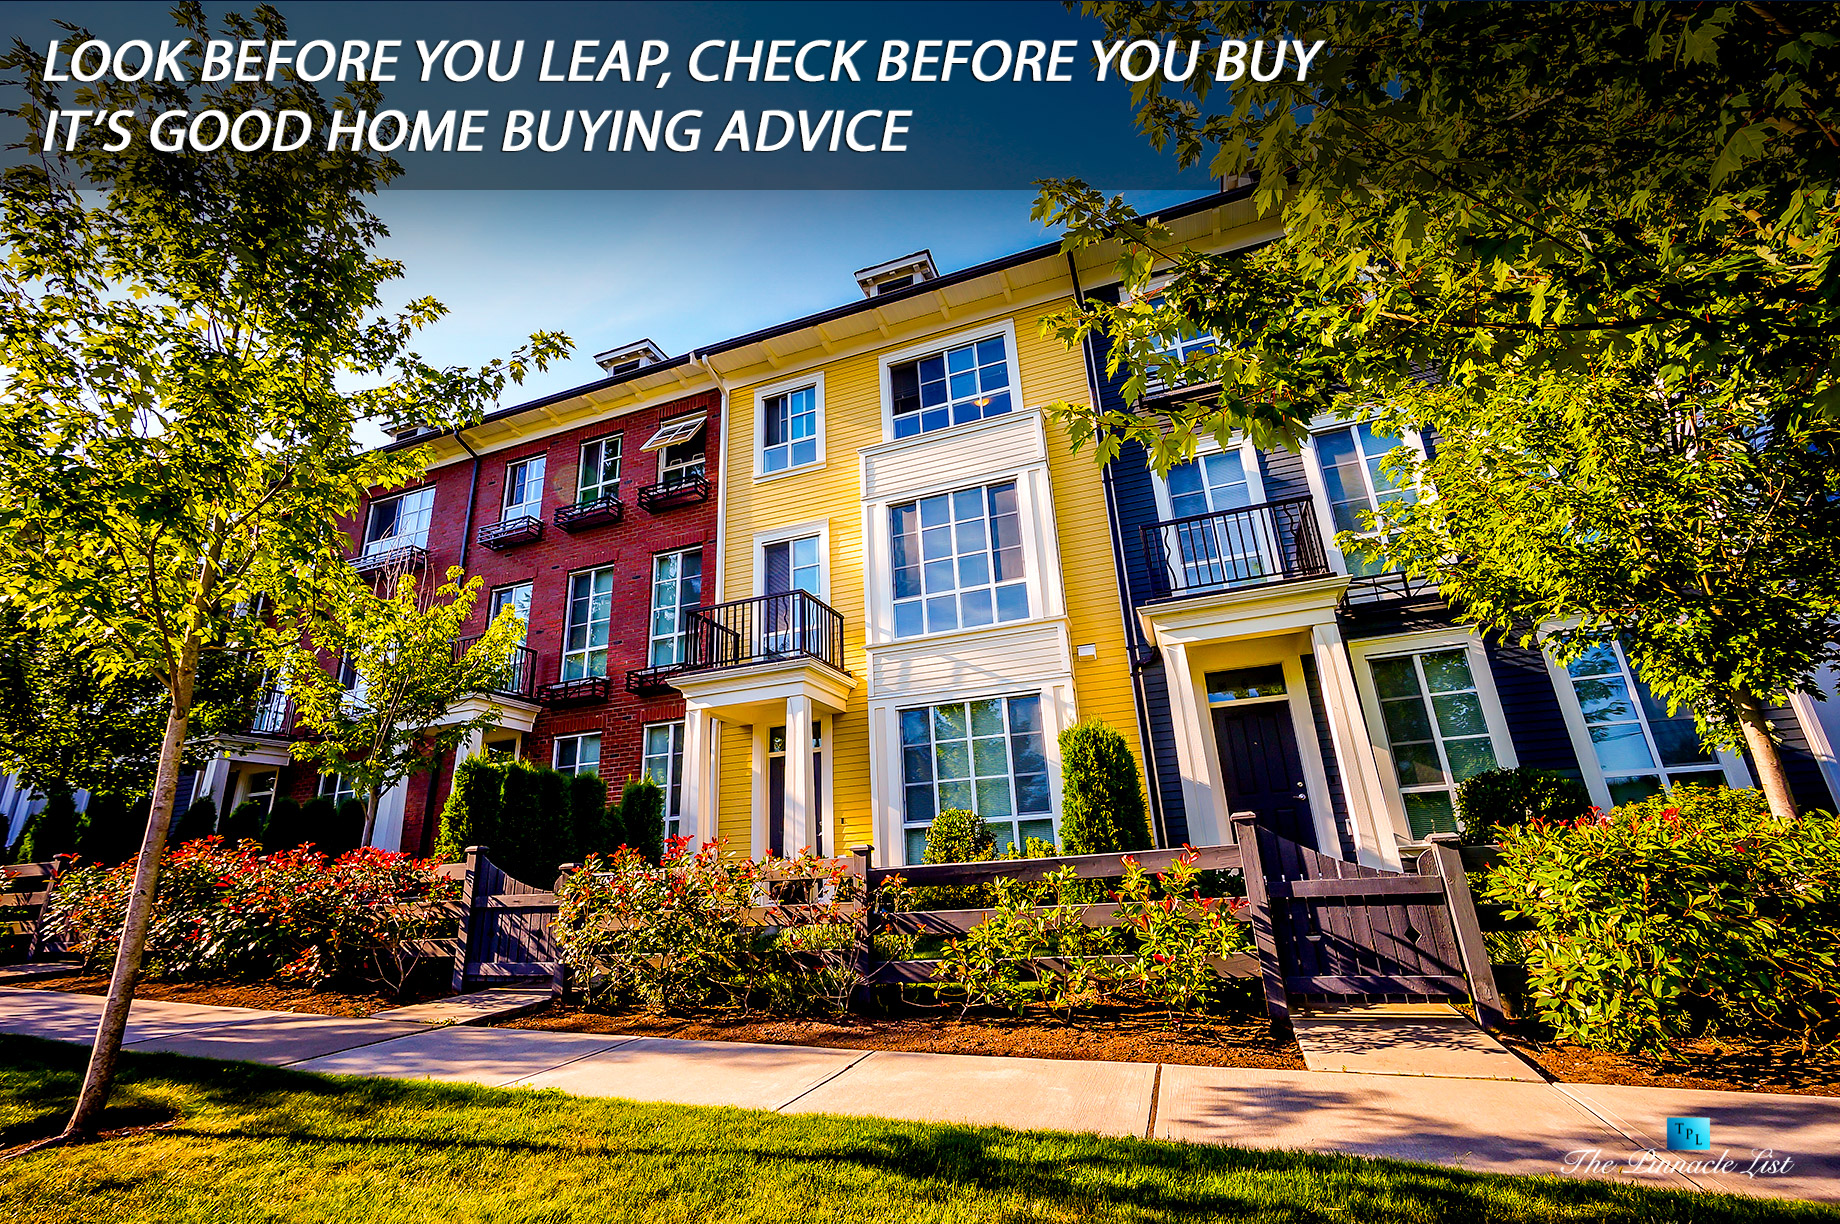 Look Before You Leap, Check Before You Buy - It's Good Home Buying Advice